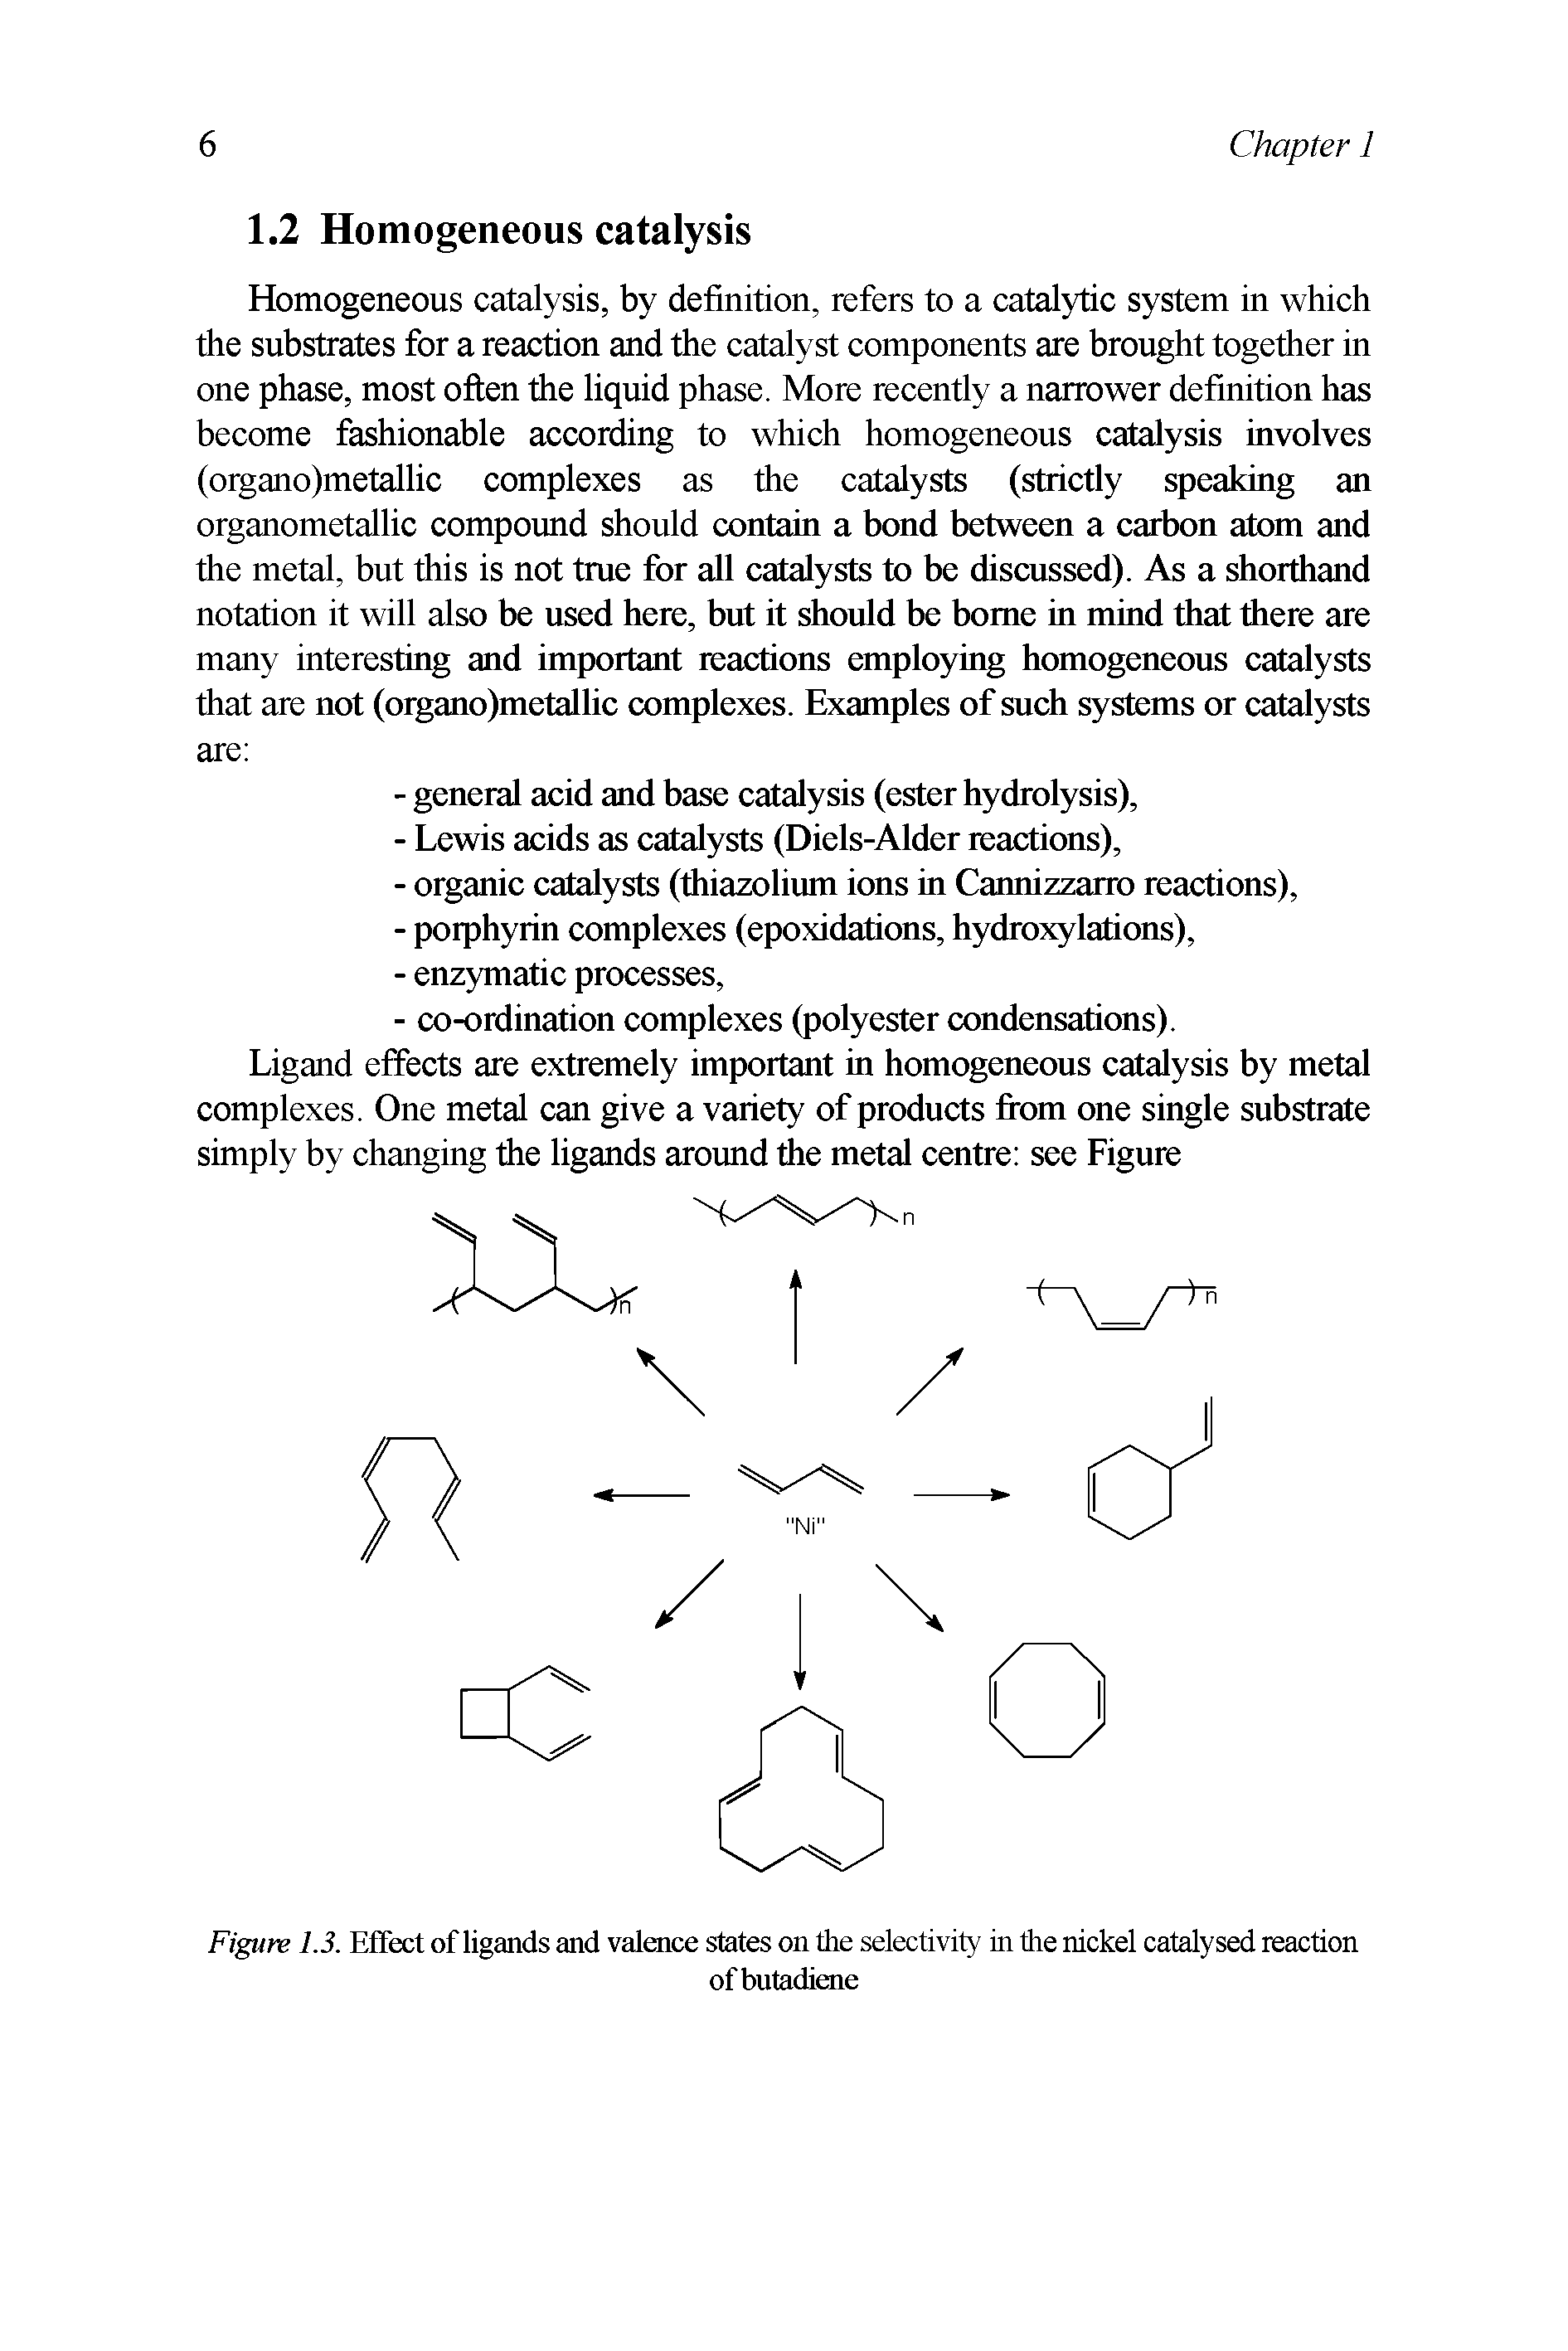 Figure 1.3. Effect of ligands and valence states on the selectivity in the nickel catalysed reaction...